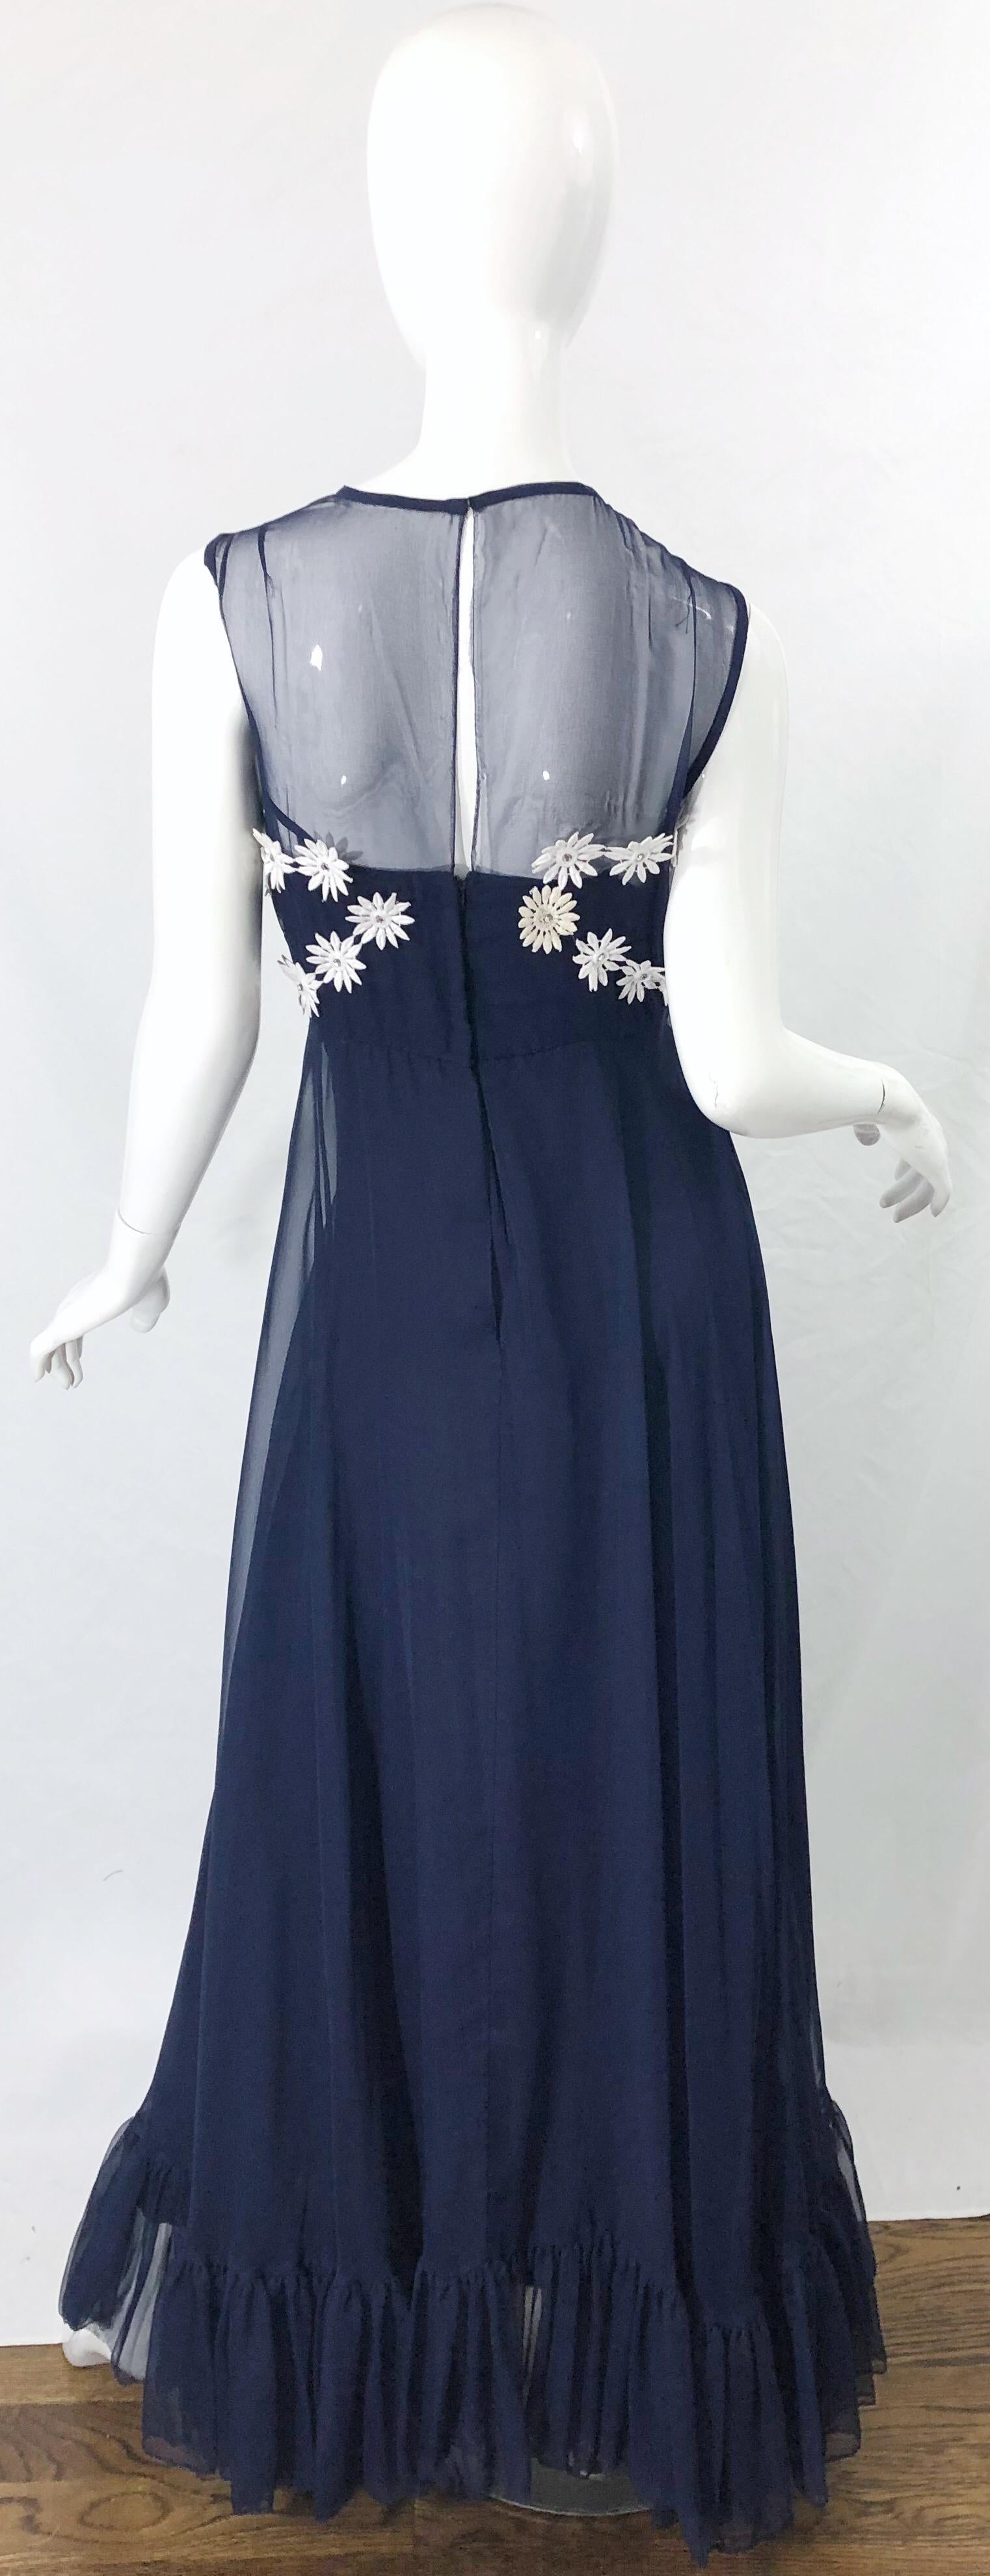 navy dress with white flowers